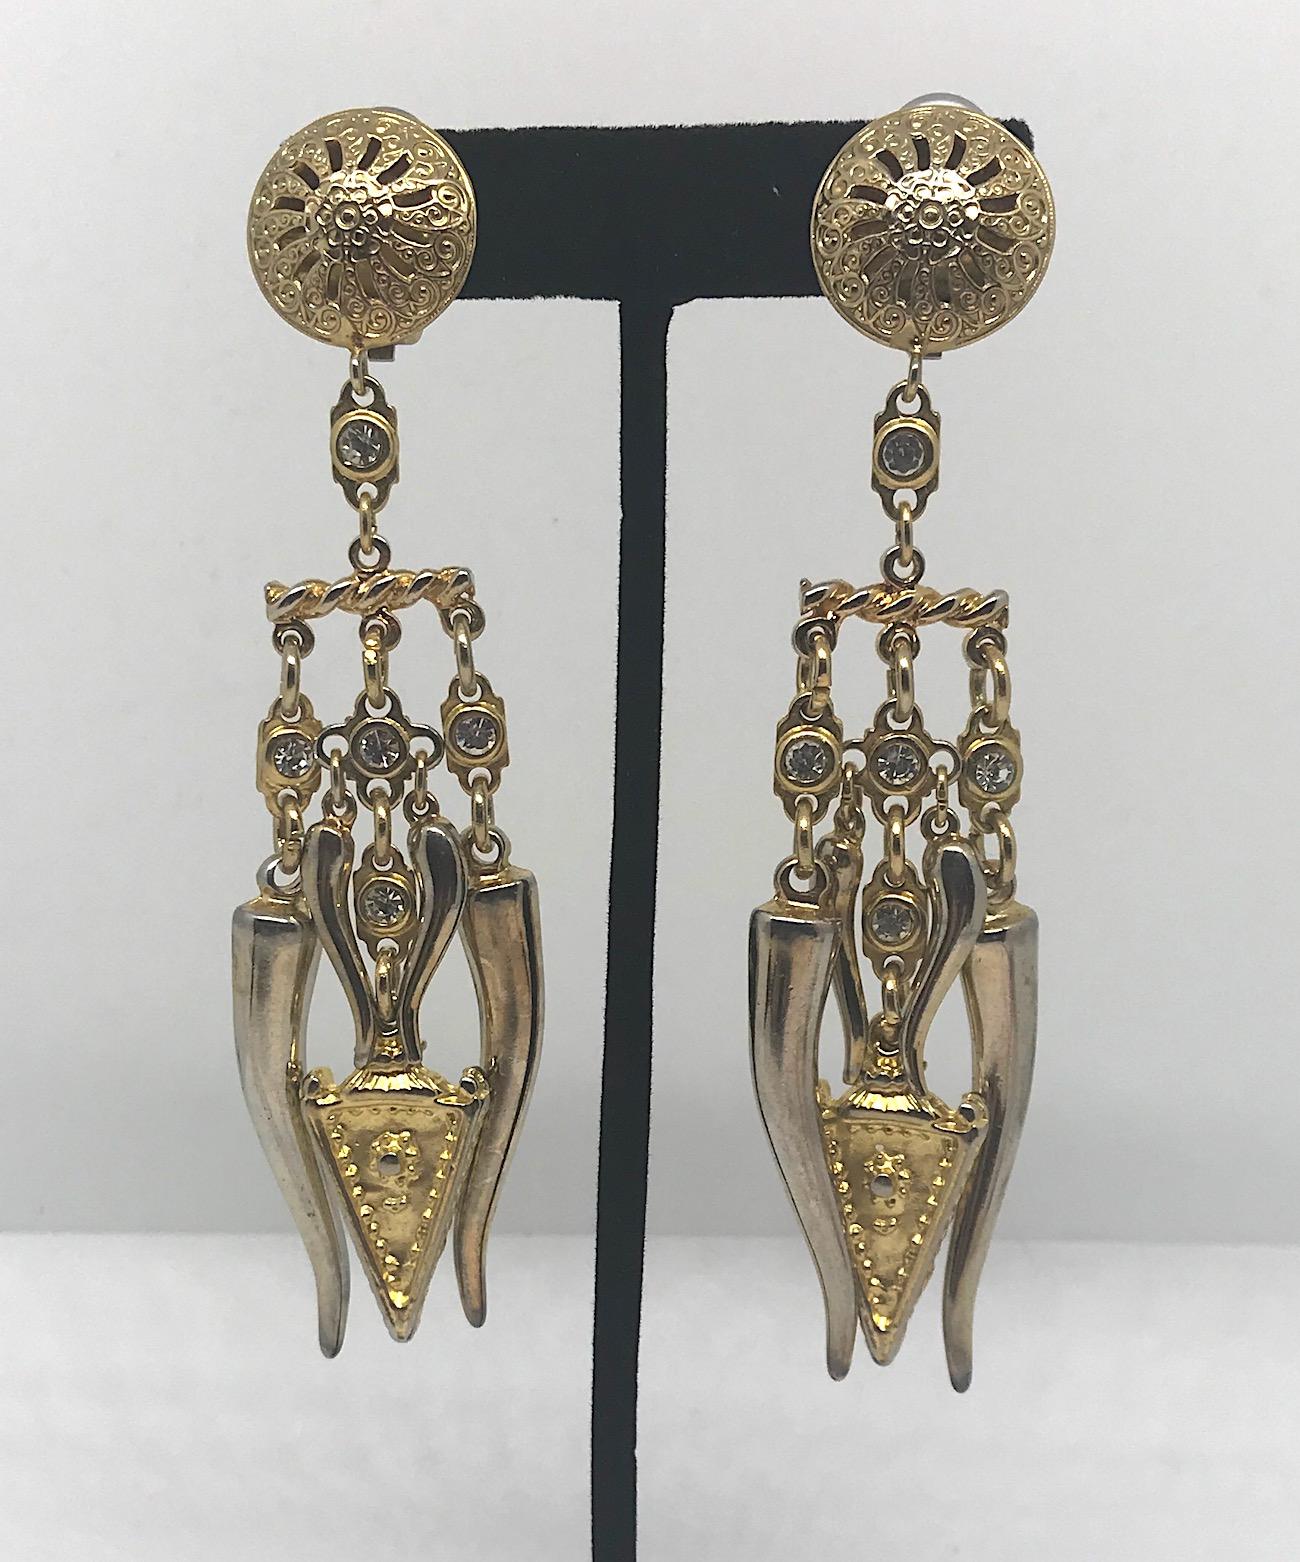 Gold with rhinestone accent long Etruscan style earrings by Italian designer Carlo Zini  Worn and part of the collection of Italian actress Elsa Martinelli. Gold plate with two large and two small cornicello or Italian horns of good luck. Each